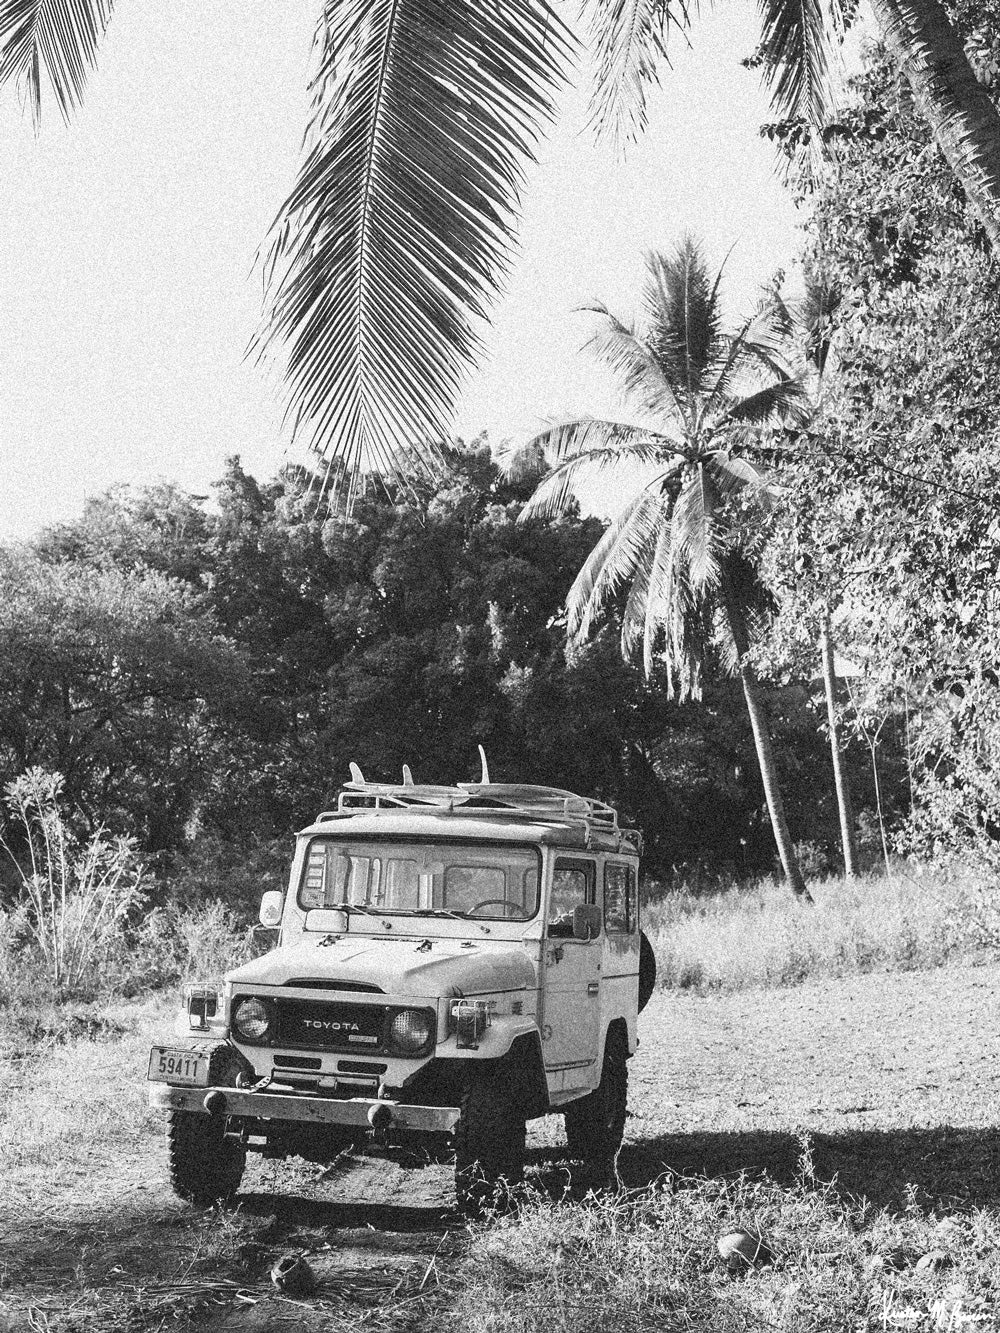 Down a dirt road in Costa Rica lies perfect waves just waiting for you to paddle out --  hop on in to this gorgeous, vintage Toyota Land Cruiser FJ40 and let's roll! "Scenic Route" black and white Land Cruiser photo print of surfboards racked on a vintage Toyota FJ40 photographed by Kristen M. Brown of Samba to the Sea @ The Sunset Shop.